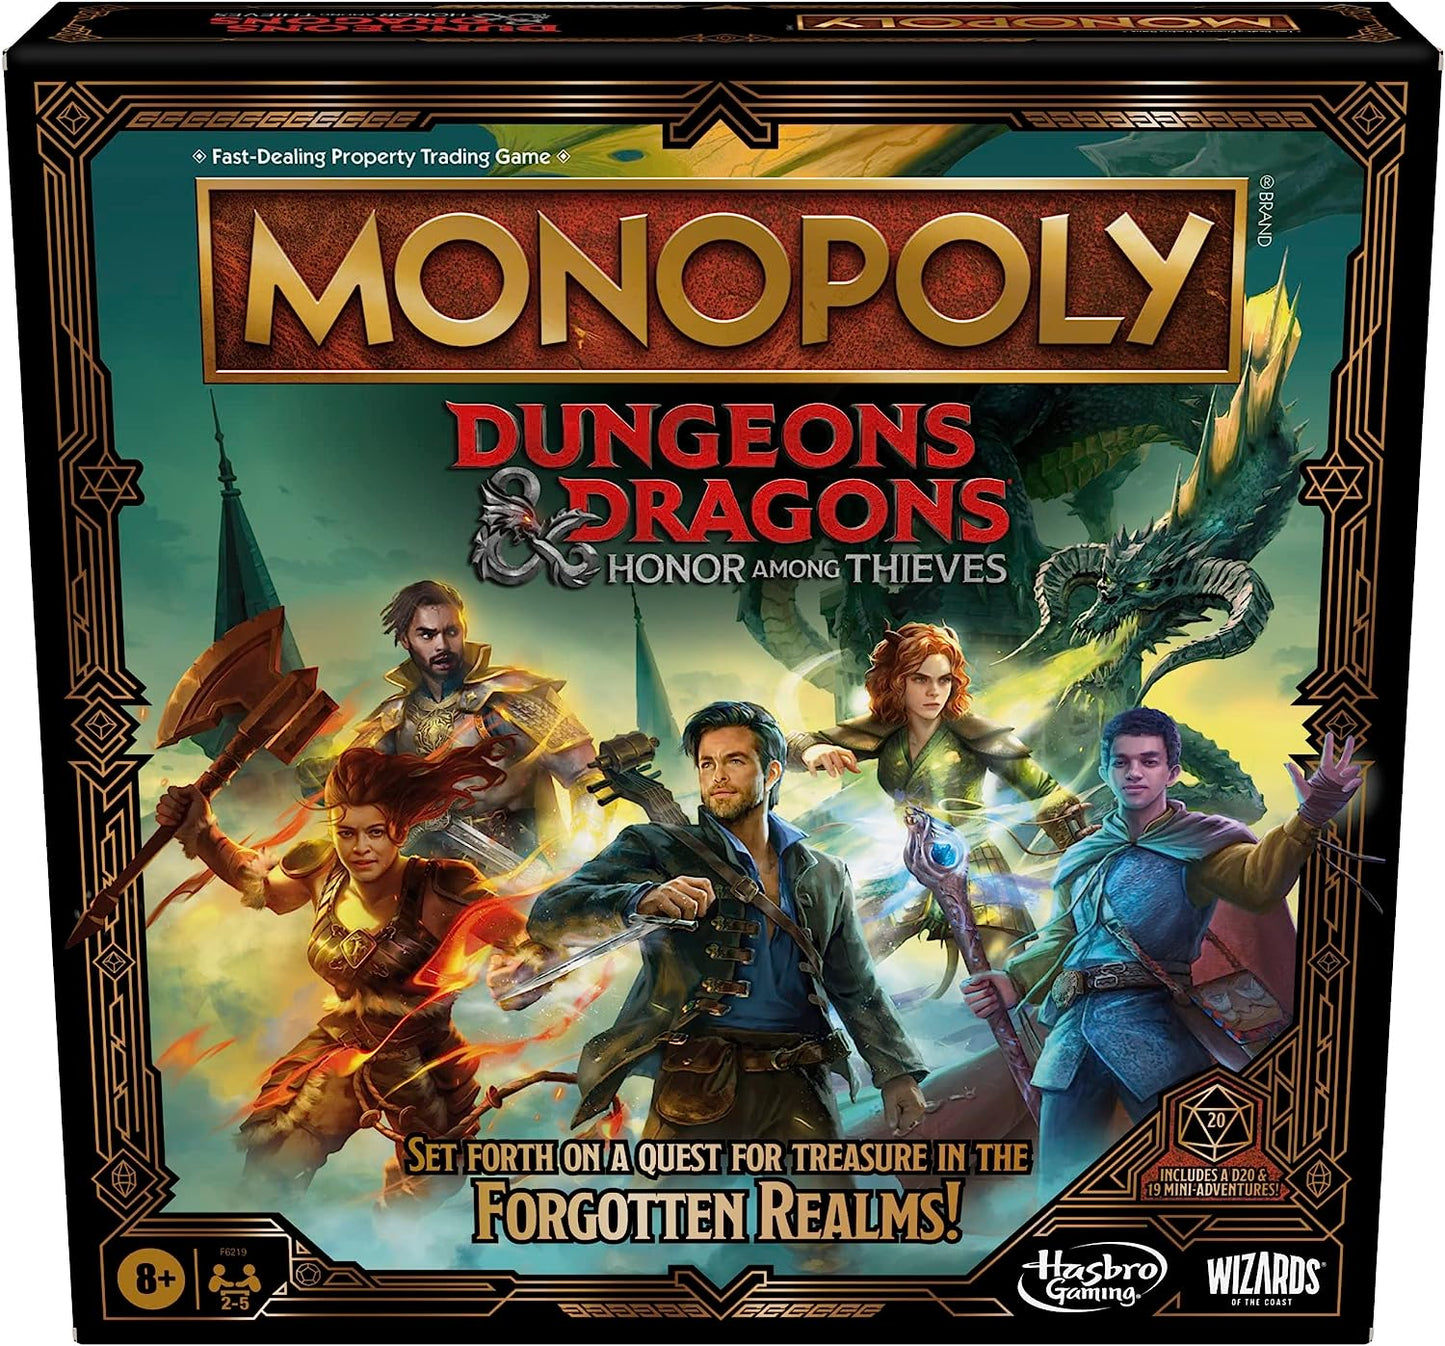 MONOPOLY DUNGEONS AND DRAGONS MOVIE